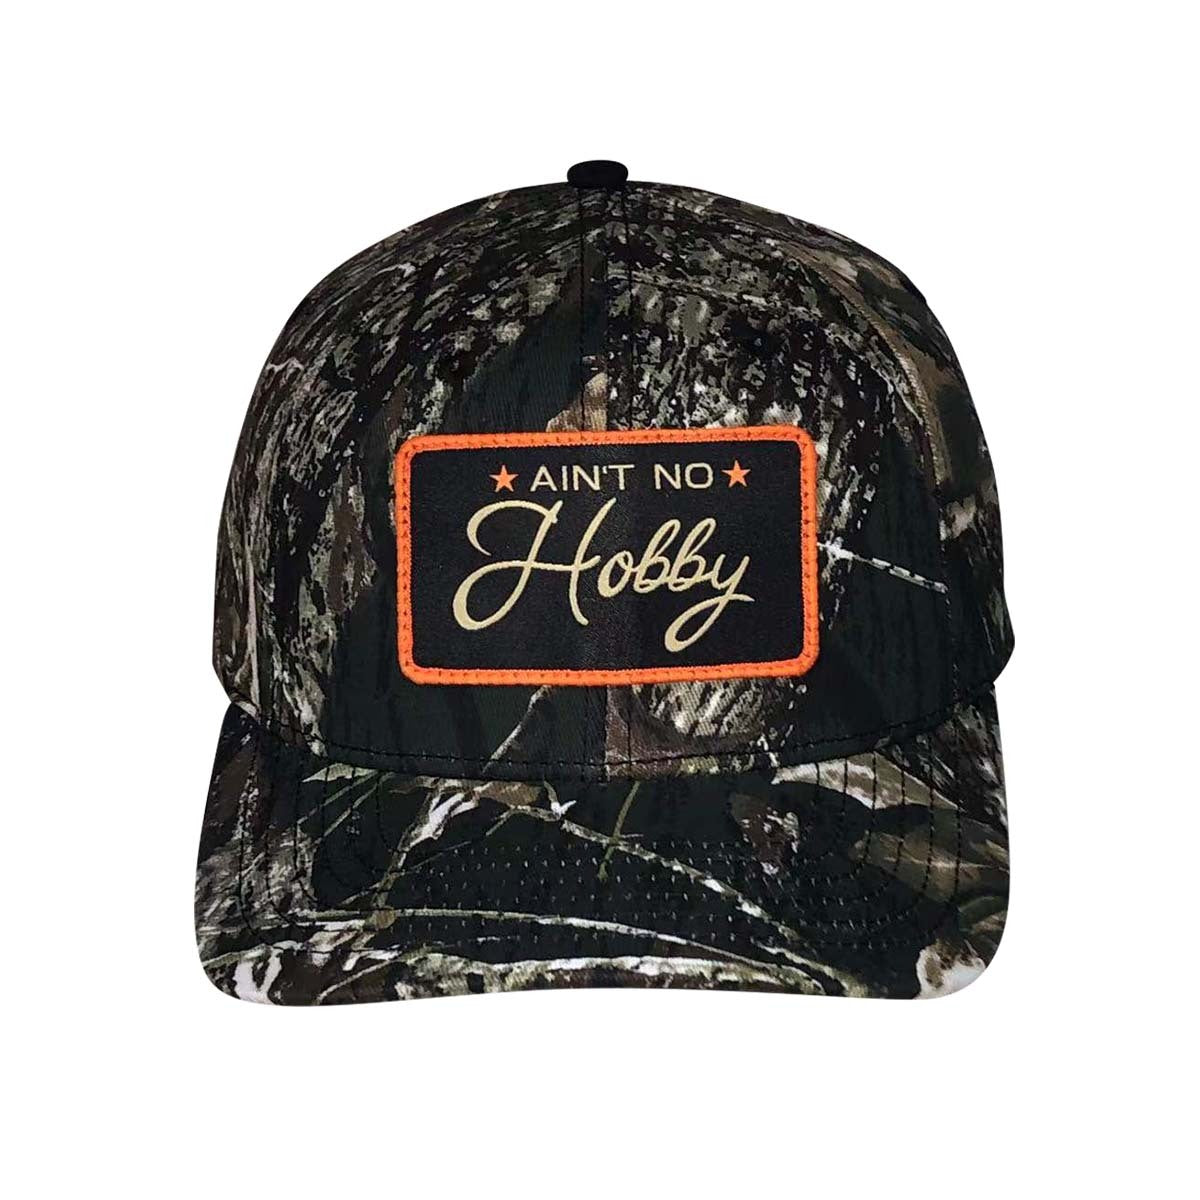 Barstool Golf Ain't No Hobby Patch Camo Snapback Hat II-Hats-Fore Play-One Size-Brown-Barstool Sports